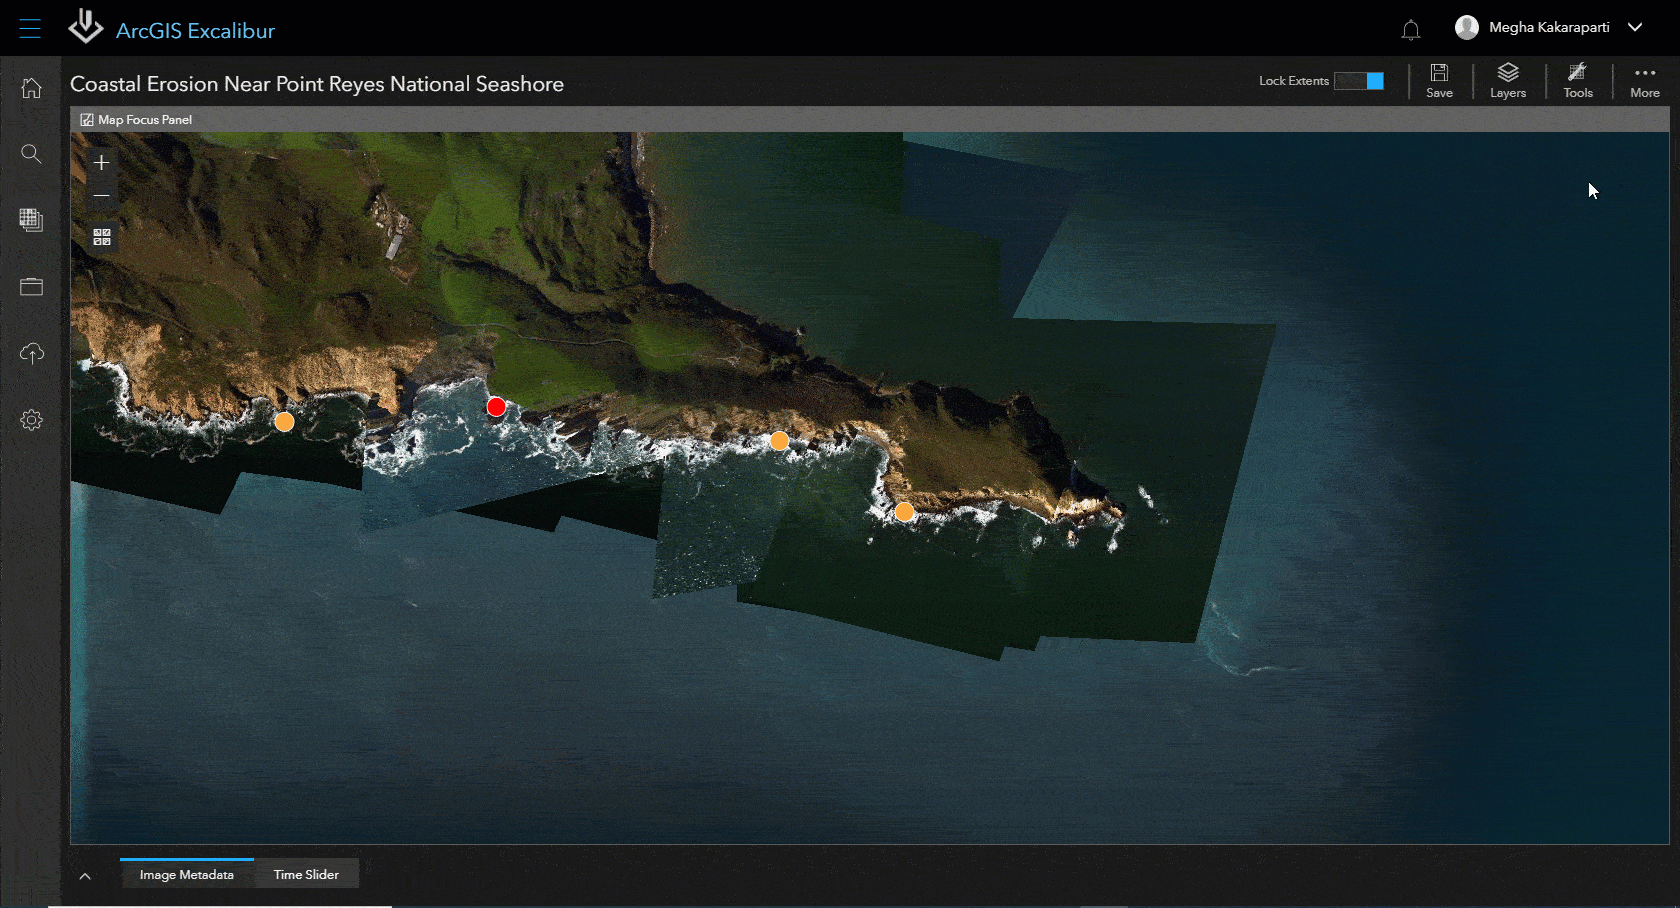 Coastal erosion near Point Reyes National Seashore observations collected in ArcGIS Excalibur 